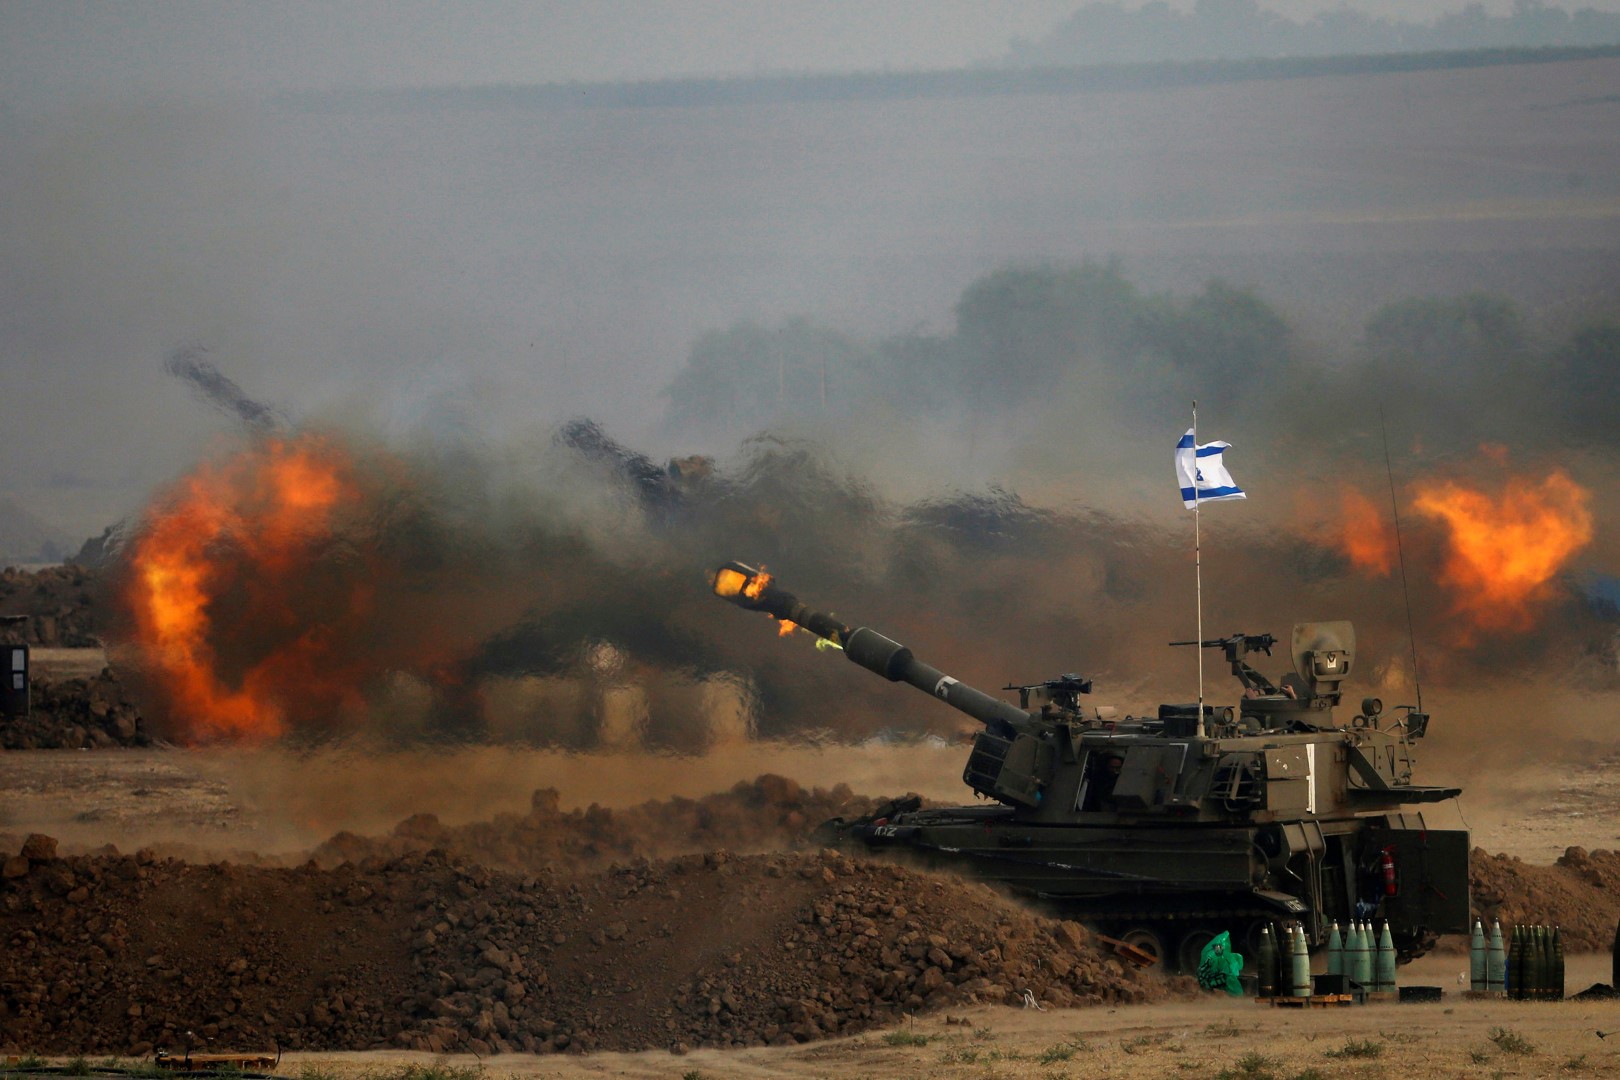 An Israeli mobile artillery unit fires towards the Gaza Strip August 1, 2014. Israel declared a Gaza ceasefire over on Friday and killed more than 50 Palestinians in renewed shelling, saying militants had breached the truce shortly after it began and apparently captured an Israeli soldier. The 72-hour break announced by U.S. Secretary of State John Kerry and U.N. Secretary-General Ban Ki-moon was the most ambitious attempt so far to end more than three weeks of fighting, and followed mounting international alarm over a rising Palestinian civilian death toll. REUTERS/ Baz Ratner (ISRAEL - Tags: CIVIL UNREST MILITARY POLITICS CONFLICT) - RTR40X5S